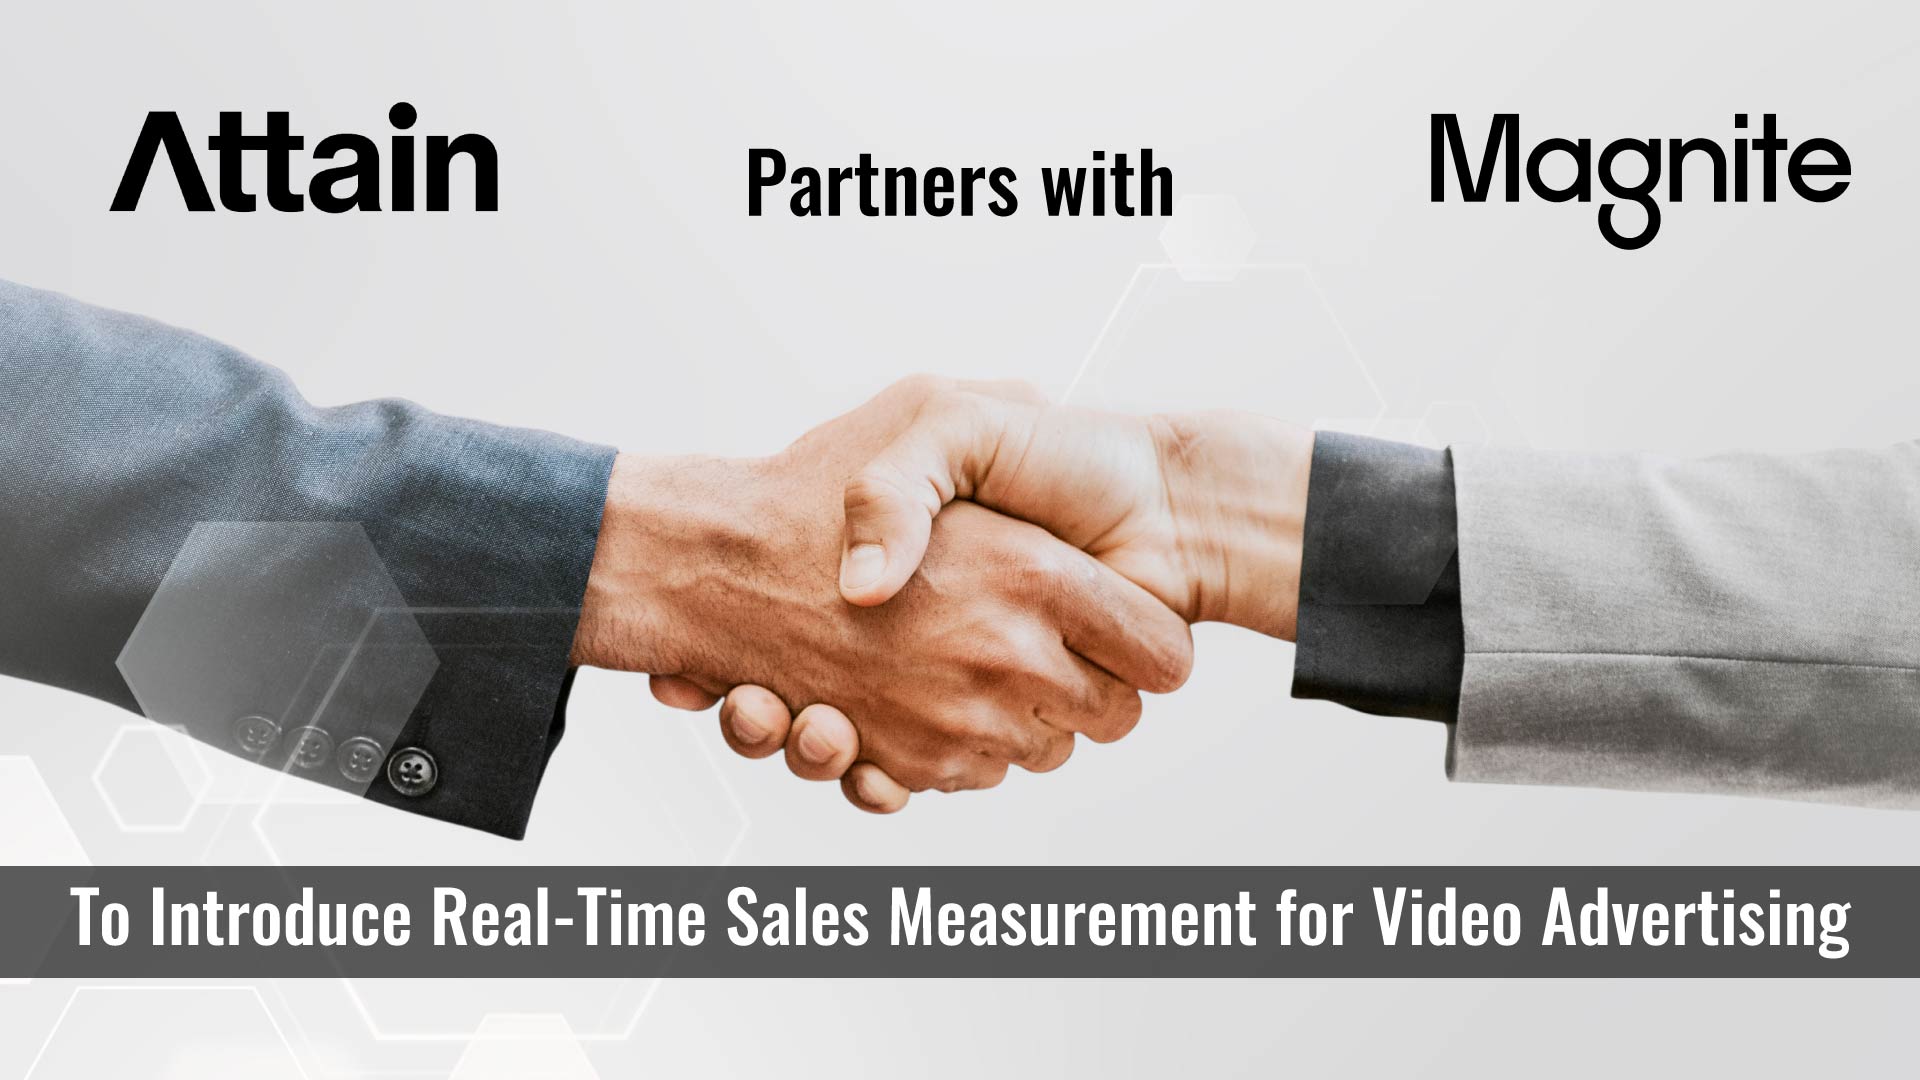 Attain Partners with Magnite to Introduce Real-Time Sales Measurement for Video Advertising Attain black logo